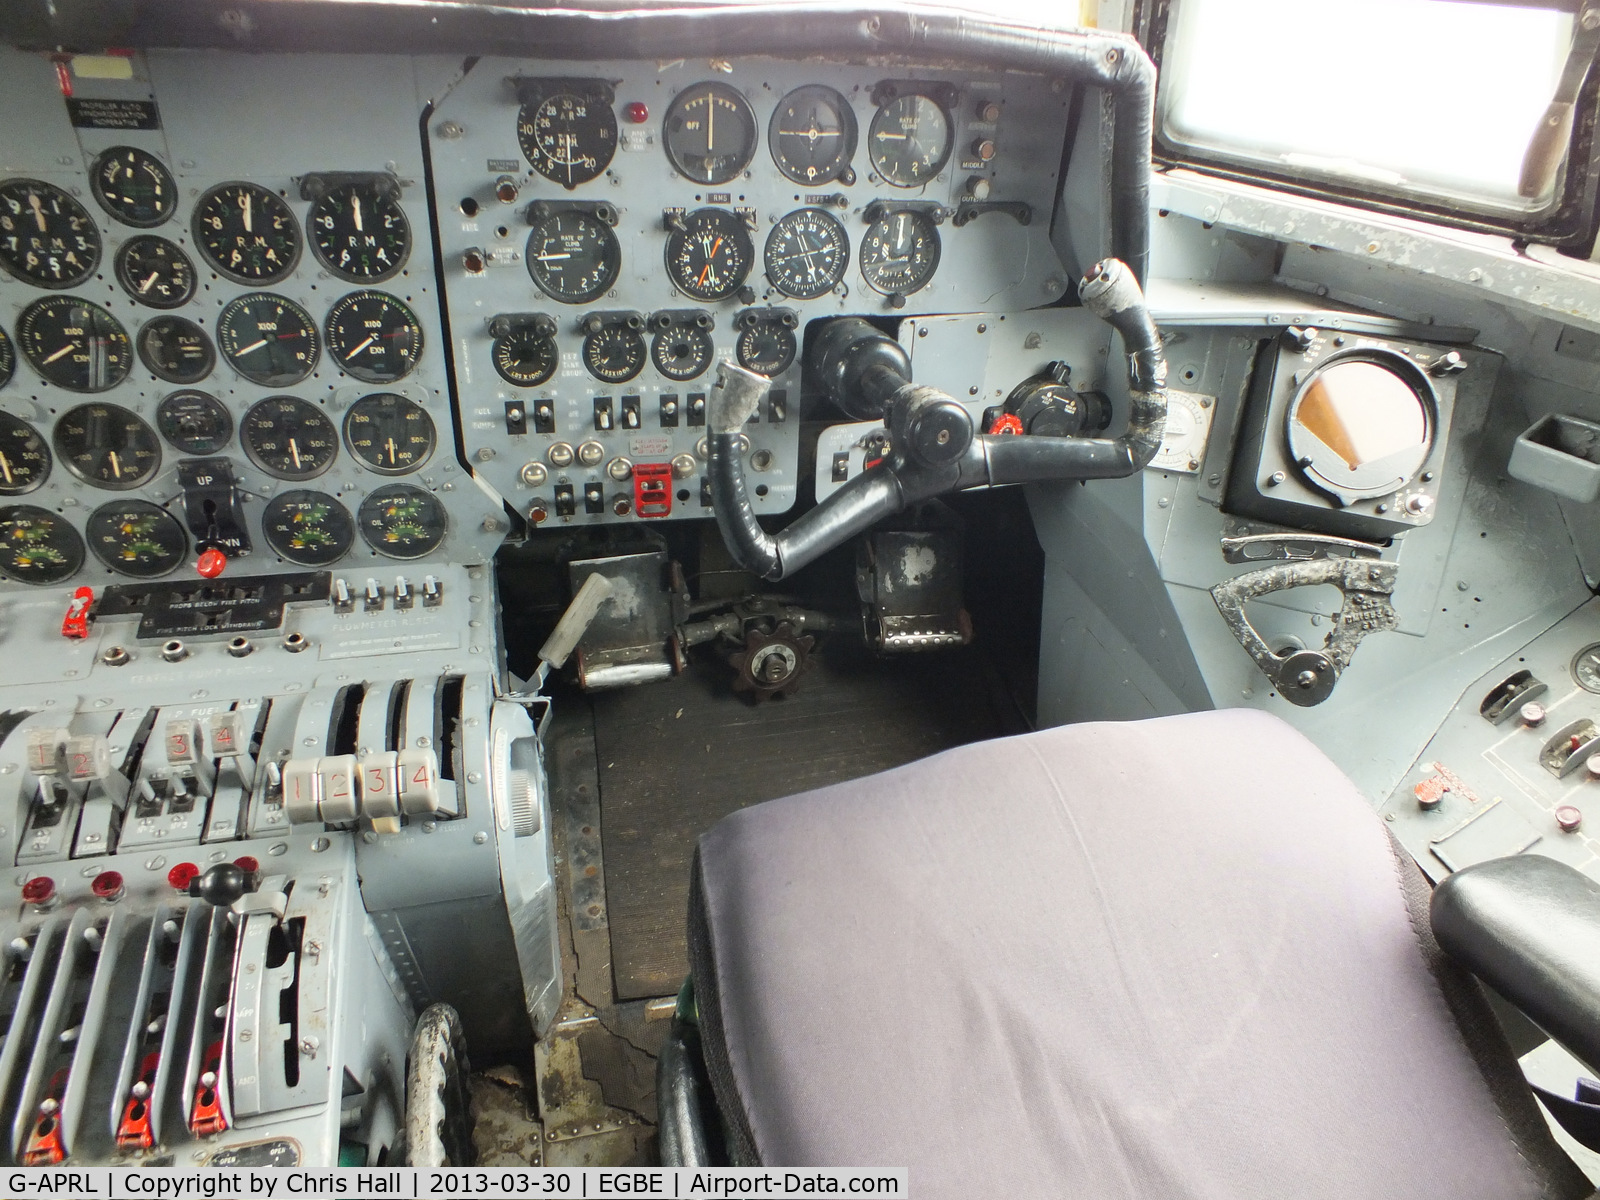 G-APRL, 1959 Armstrong Whitworth AW650 Argosy 101 C/N 6652, inside the cockpit of Argosy G-APRL preserved at the Midland Air Museum